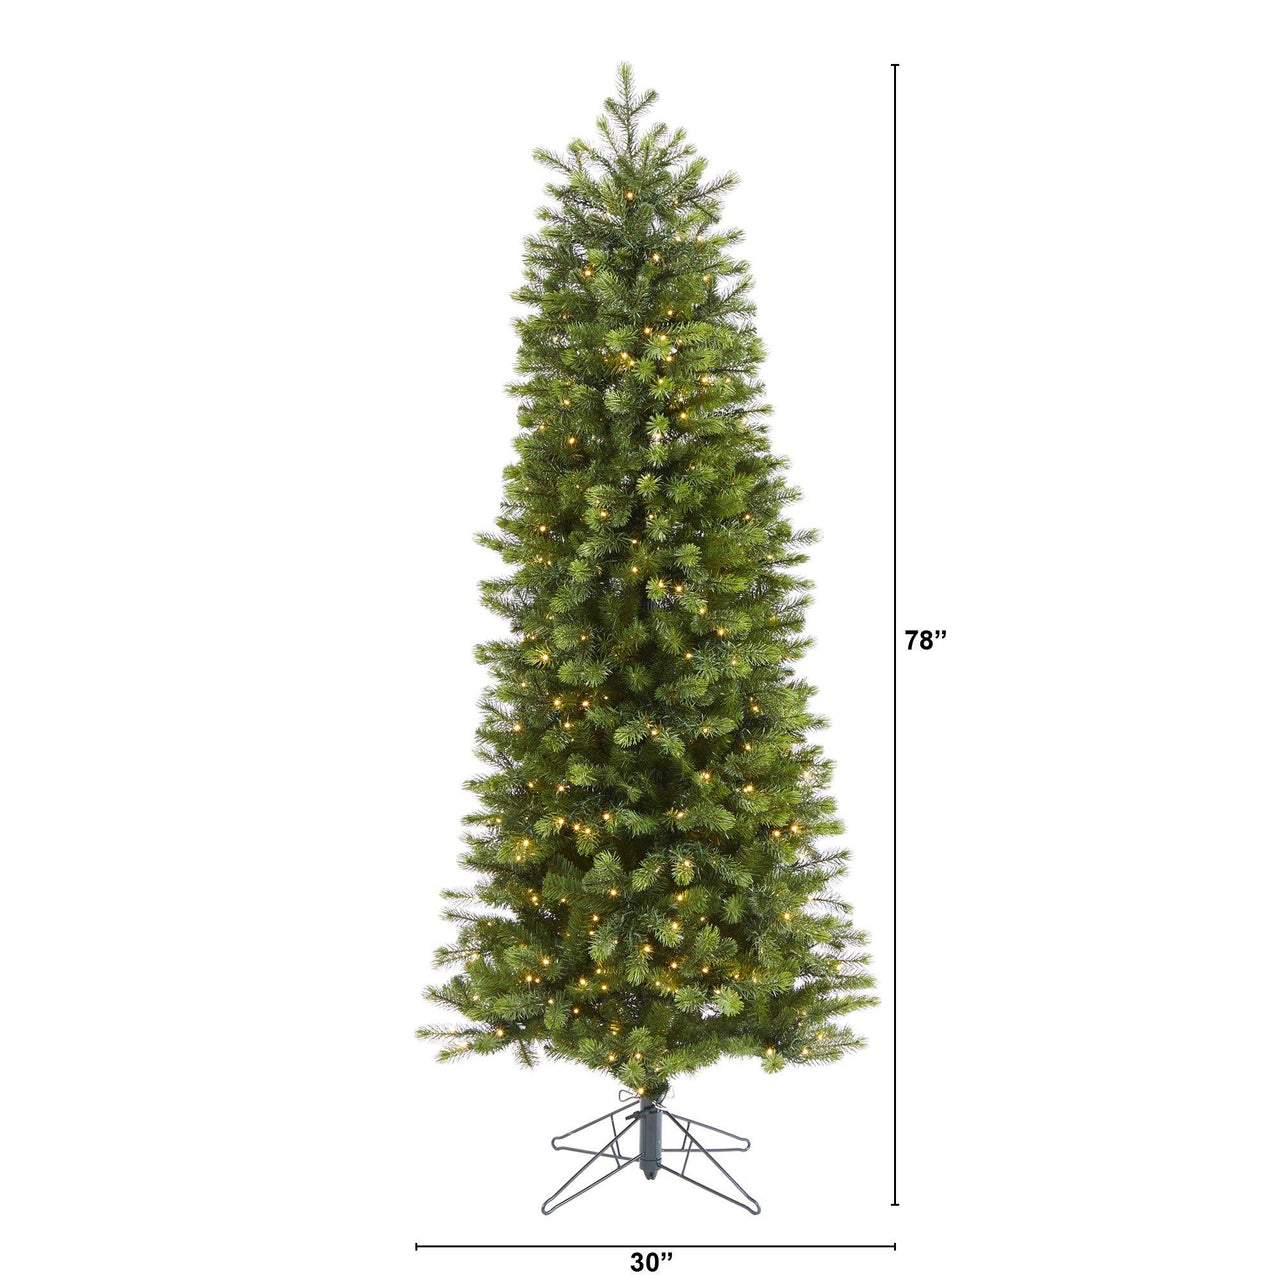 6.5' Slim Colorado Mountain Spruce Artificial Christmas Tree with 450 (Multifunction with Remote Control) Warm White Micro LED Lights with Instant Connect Technology and 918 Bendable Branches - The Fox Decor